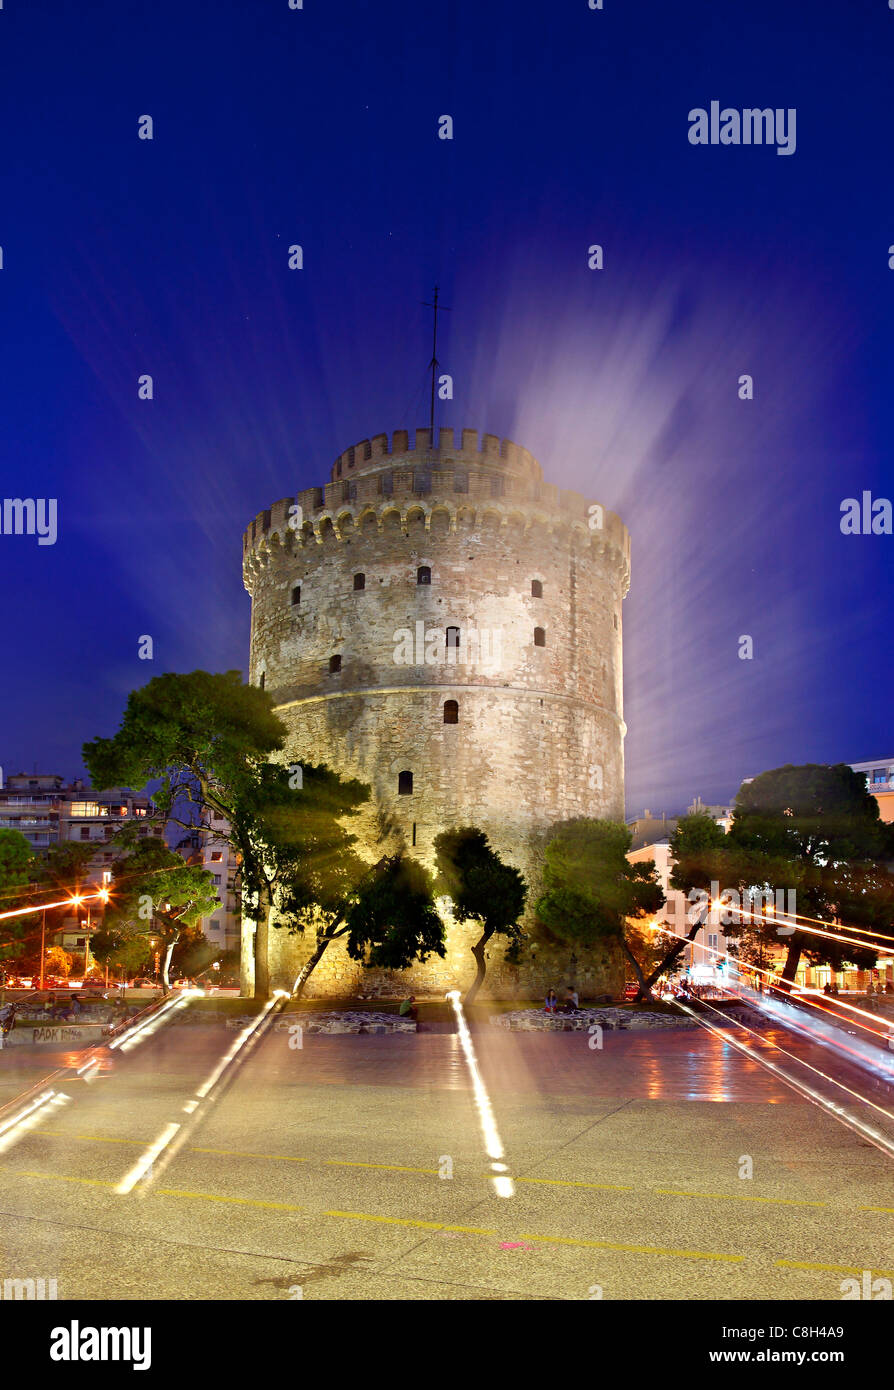 The White Tower, symbol of the city of Thessaloniki, at night ('zoom in' effect). Macedonia Greece Stock Photo